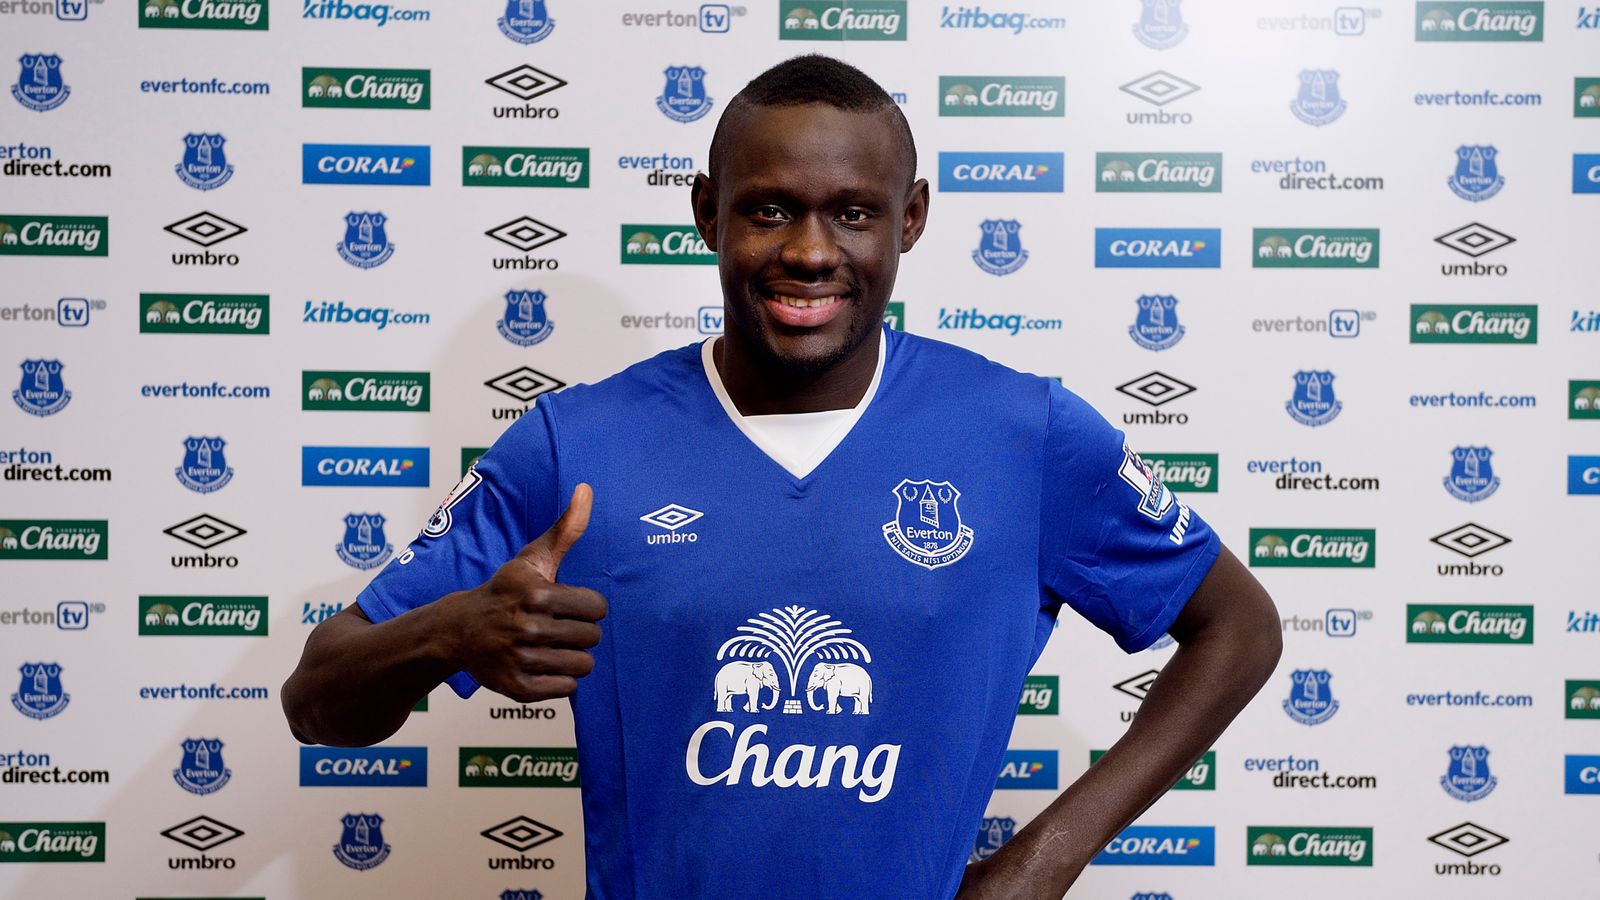 Oumar Niasse signs for Everton in £13.5m deal | Football News | Sky Sports